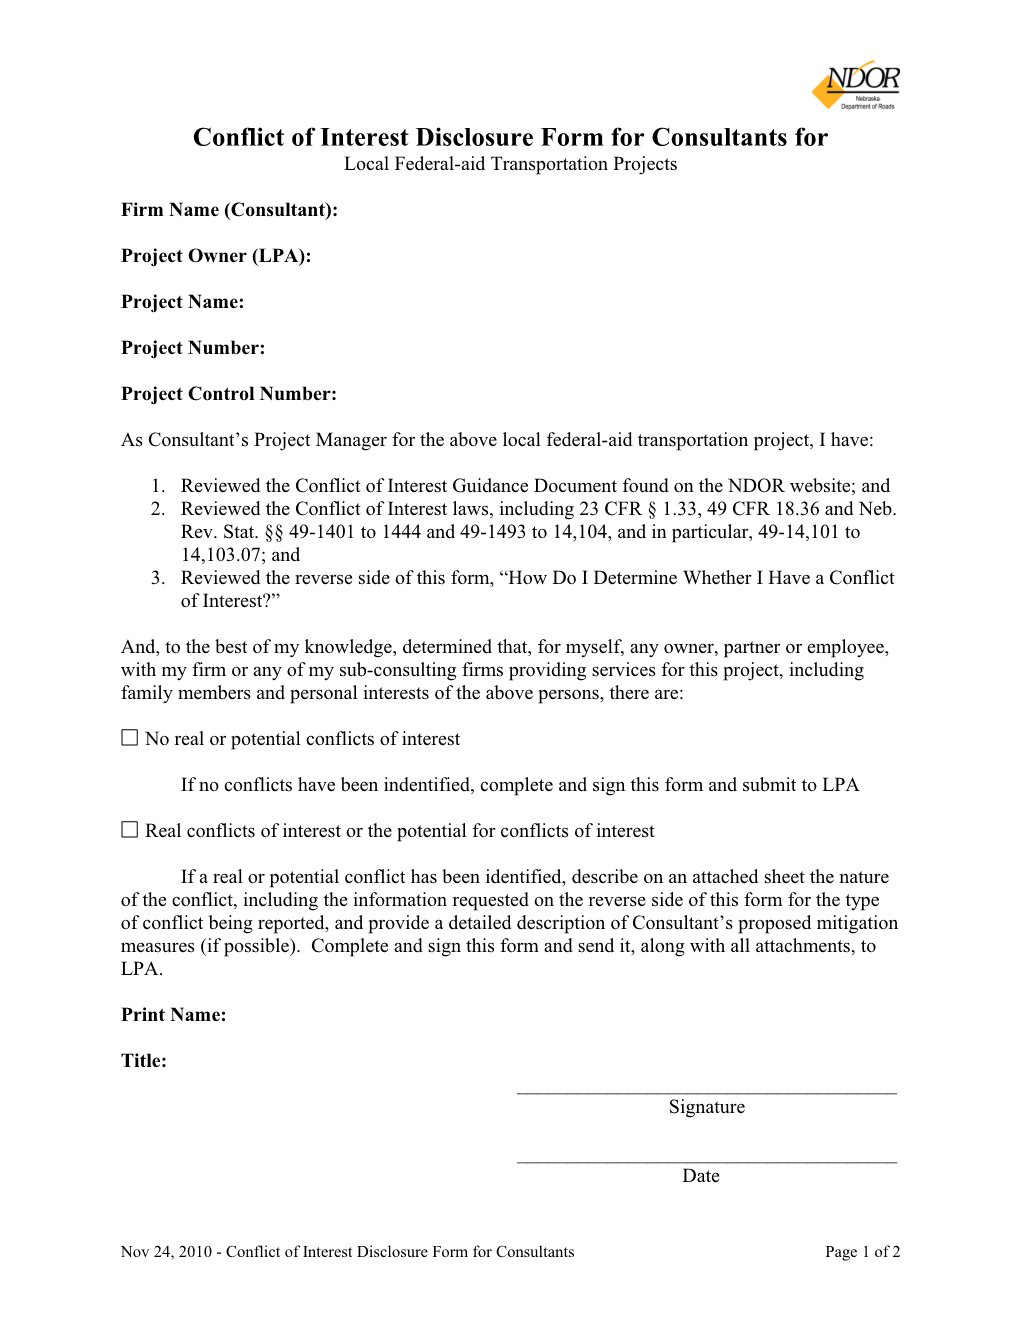 Conflict of Interest Disclosure Form for Consultants For